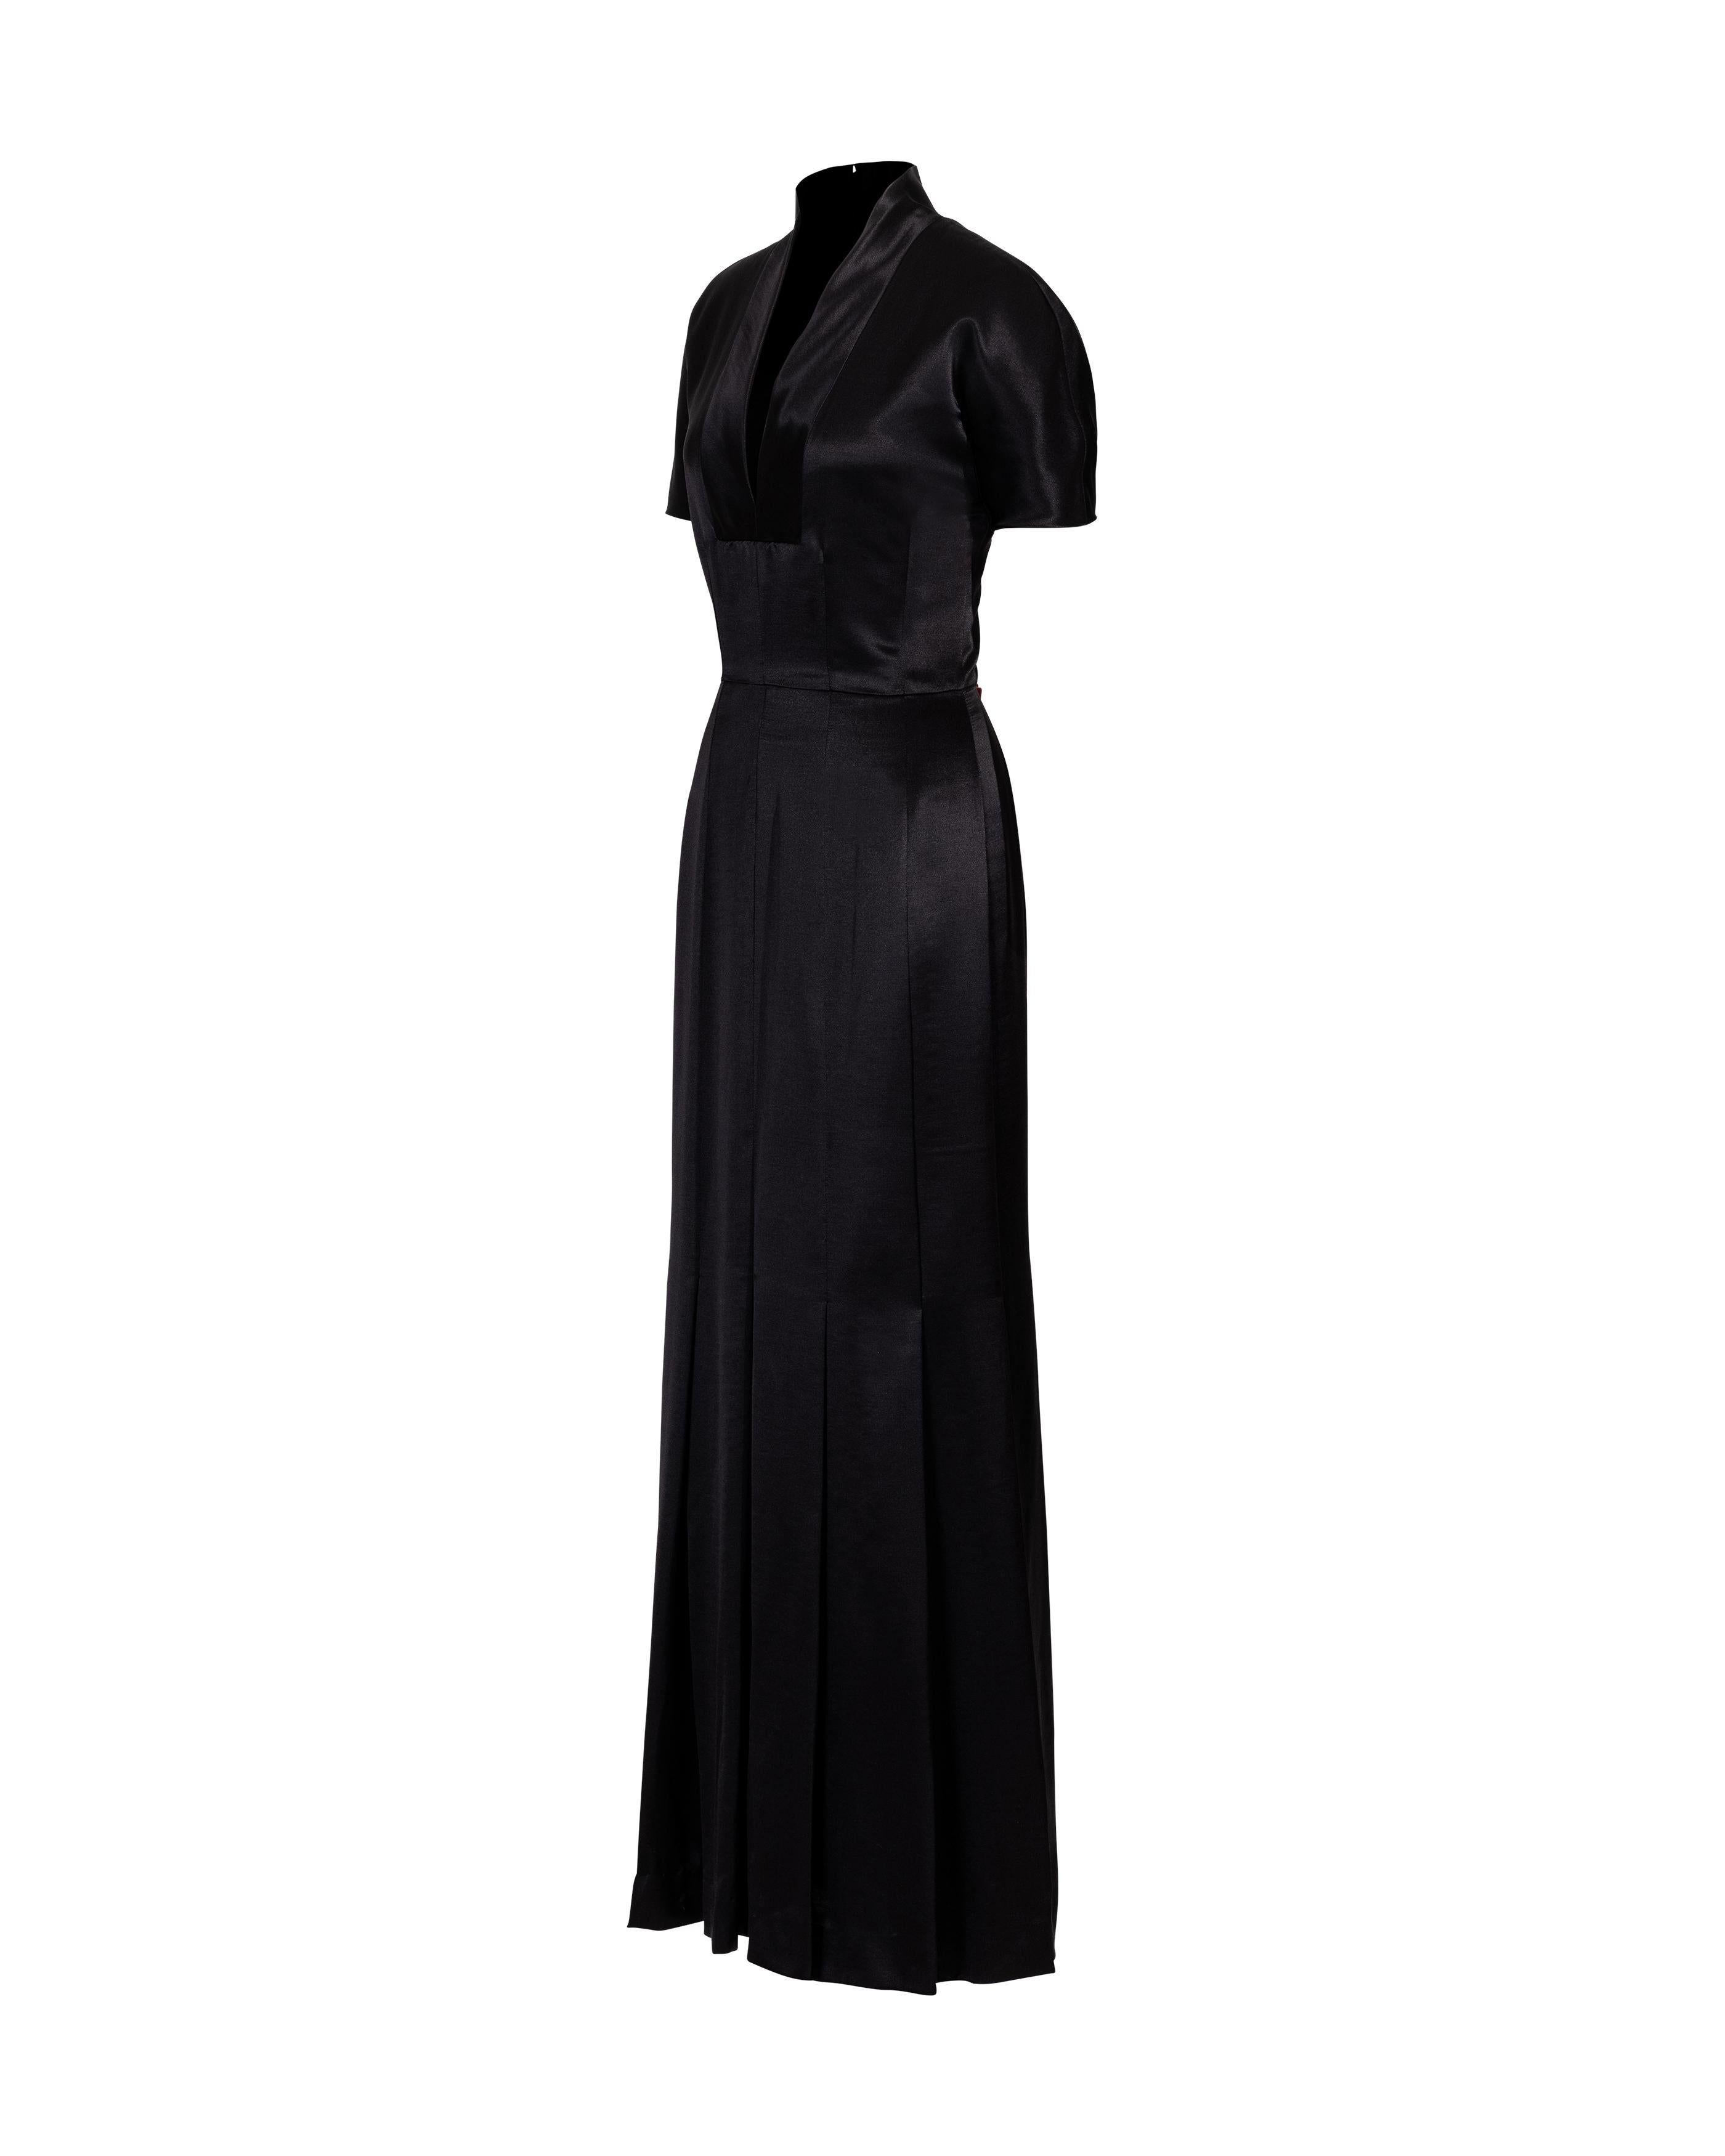 1990's Givenchy by Alexander McQueen black short sleeve pleated gown. Short sleeve, v-neck gown with fitted waist and full, pleated skirt. Concealed center-back zip closure. Fabric Contents: 60% Wool, 40% Silk with 100% Silk lining. Marked size FR